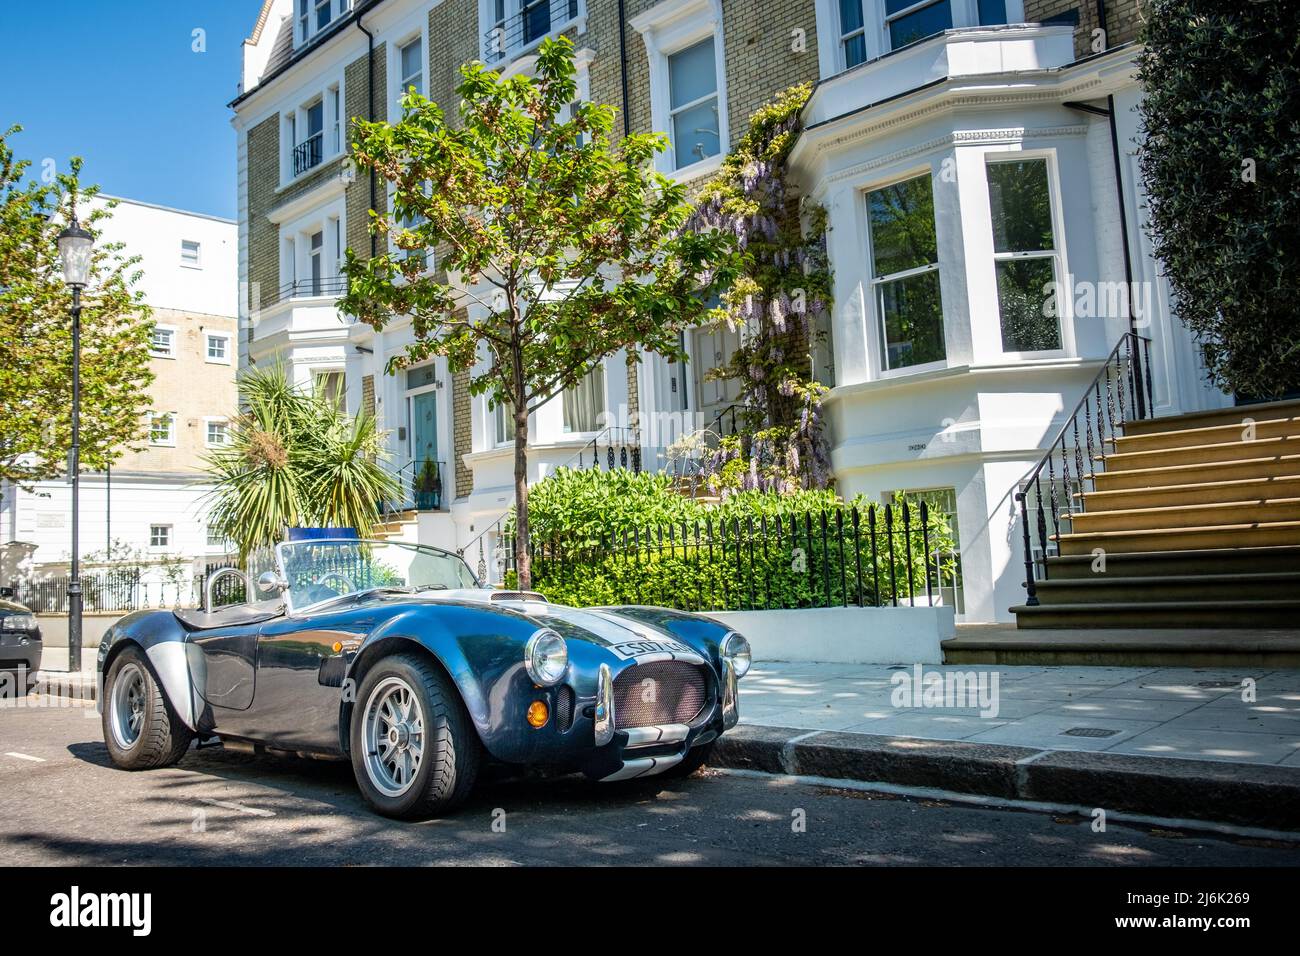 London- An AC Cobra sports car parked outside attractive street of terraced houses Stock Photo